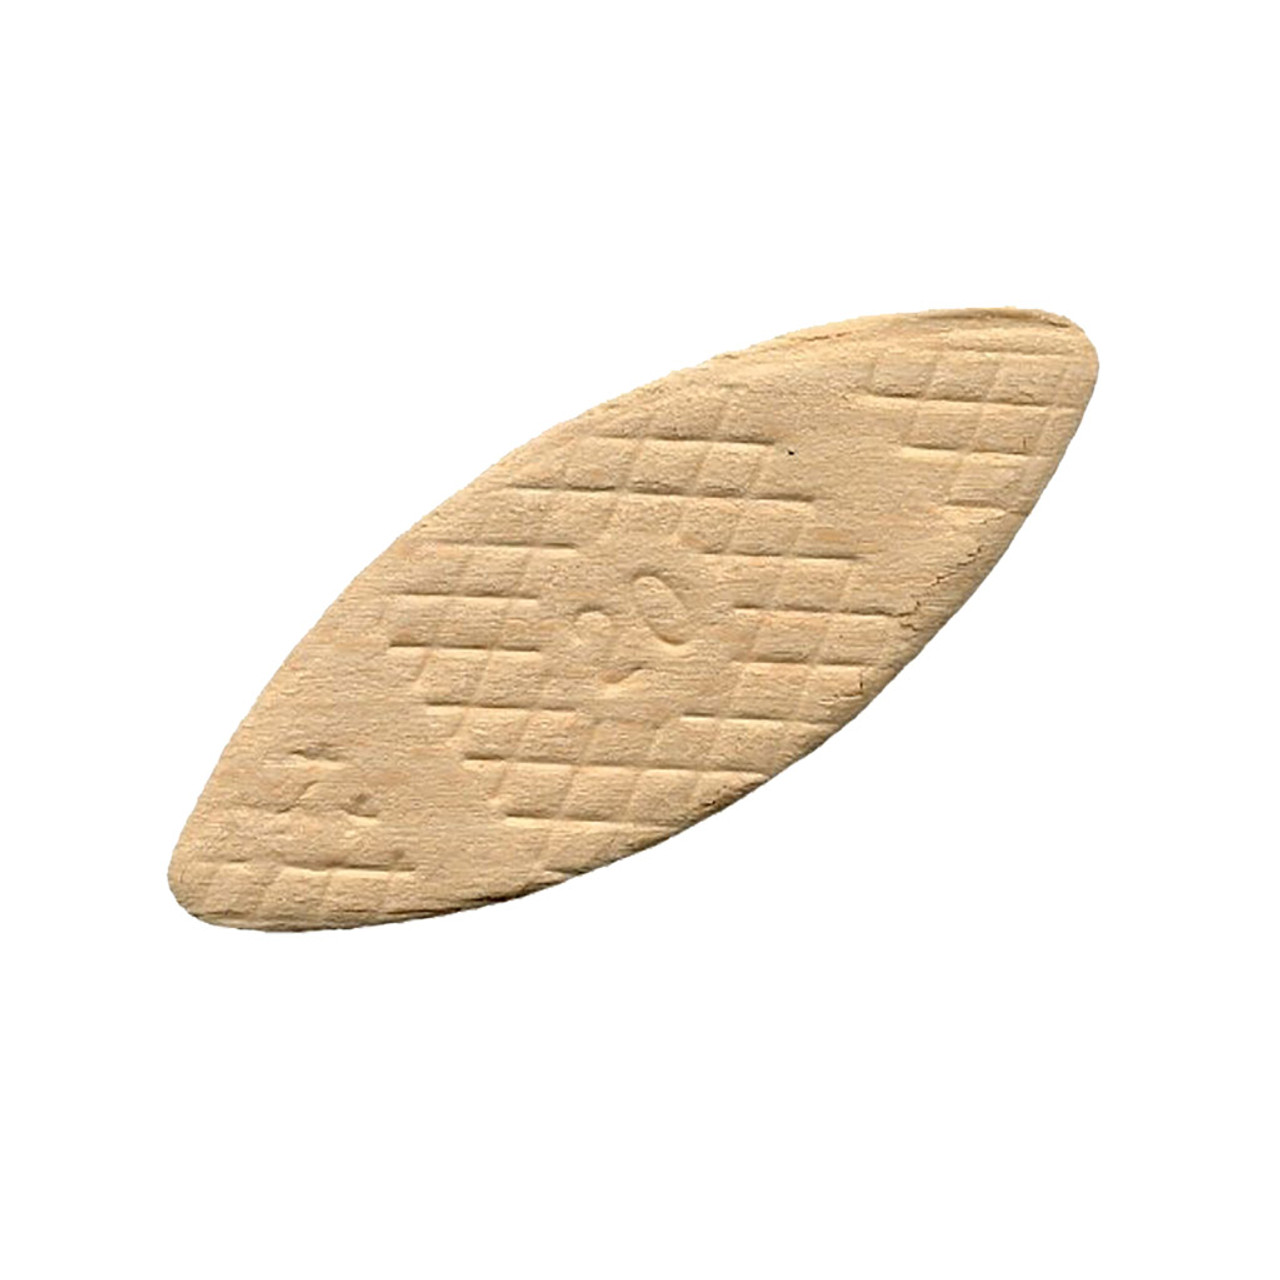 Richelieu Wood Biscuits, #20, 1,000-Pack